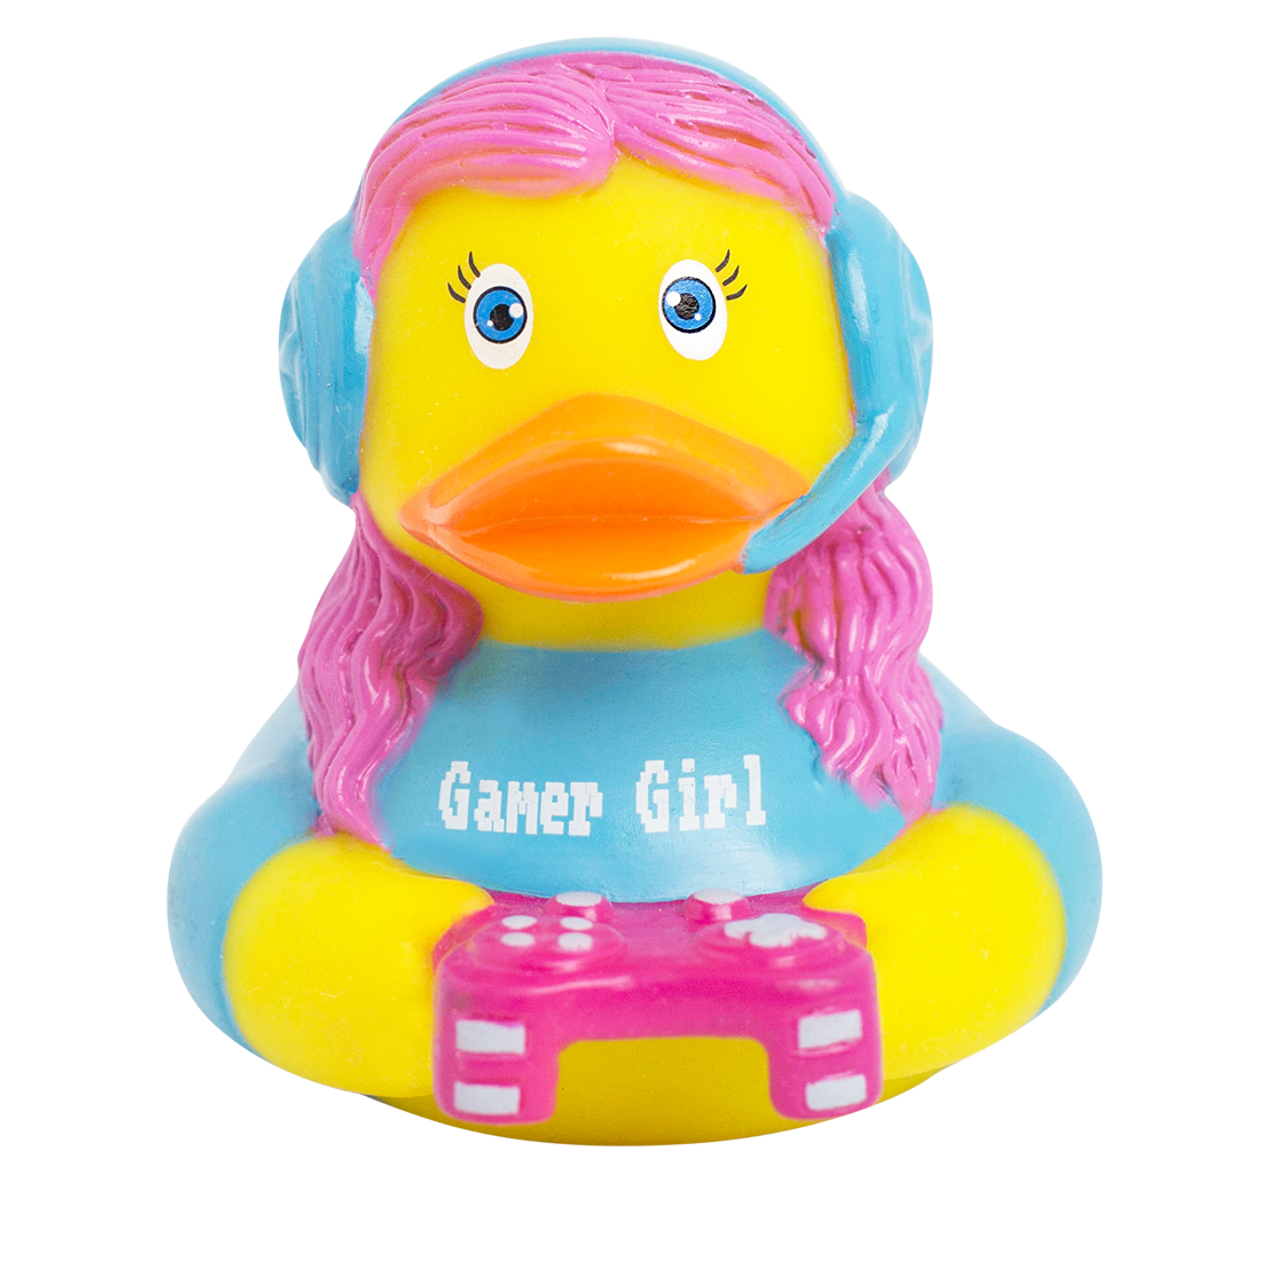 Gamer Girl Rubber Duck Bath Toy by LiLaLu